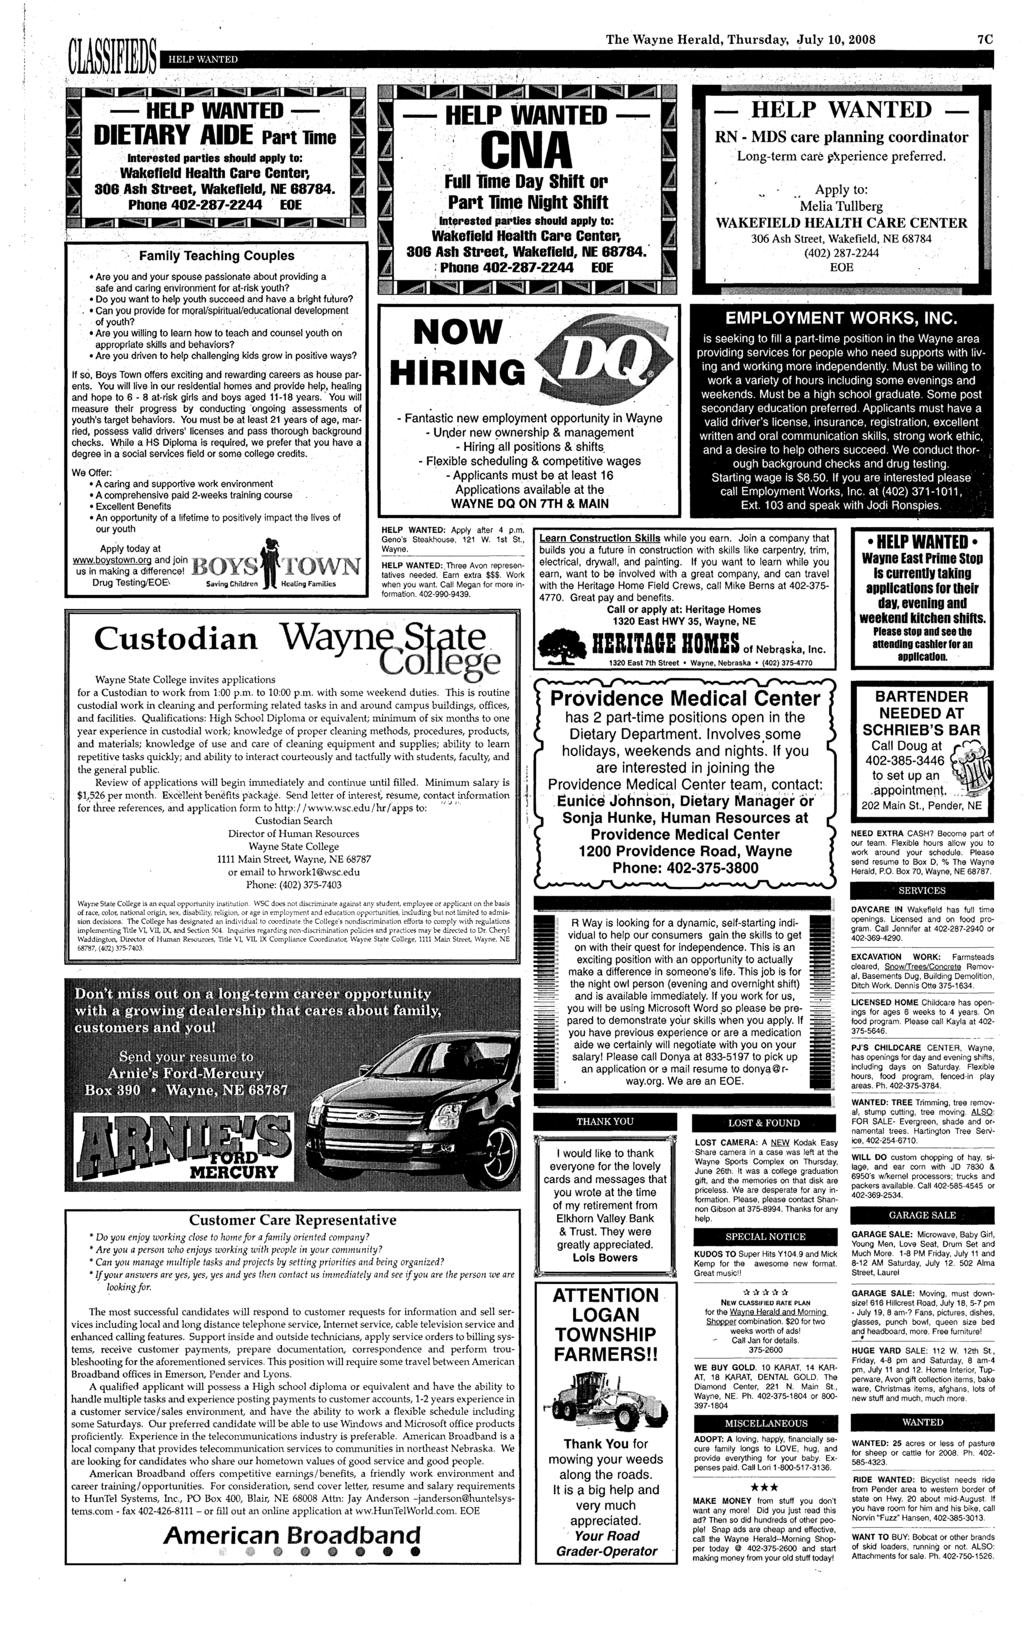 HELP WANTED The Wayne Herald, Thursday, ~uly 10,2008 7C HELP WANTED ~ DIETARY AIDE Part'lime lnieitlfjsted parties should apply to: Wal(efield Health Care Cente~ 306, Ash Street, Wakefield, NE 88184.